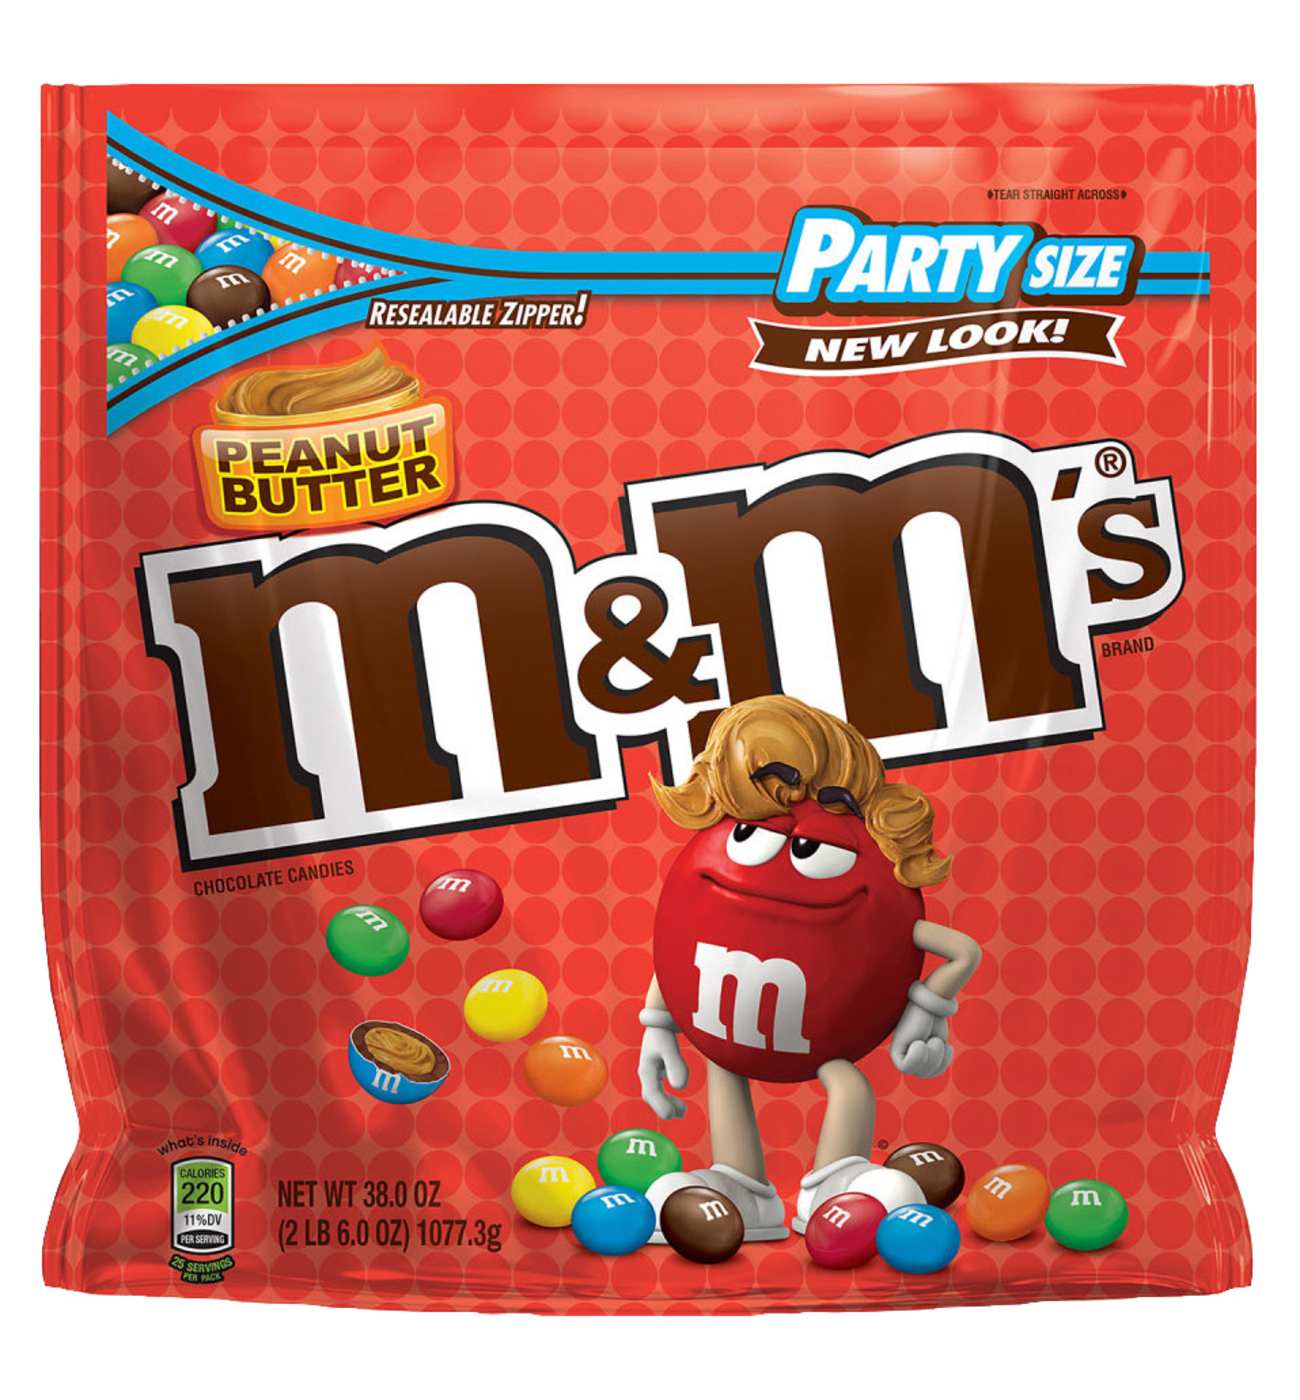 M&M'S Milk Chocolate Single Size Candy - Shop Candy at H-E-B